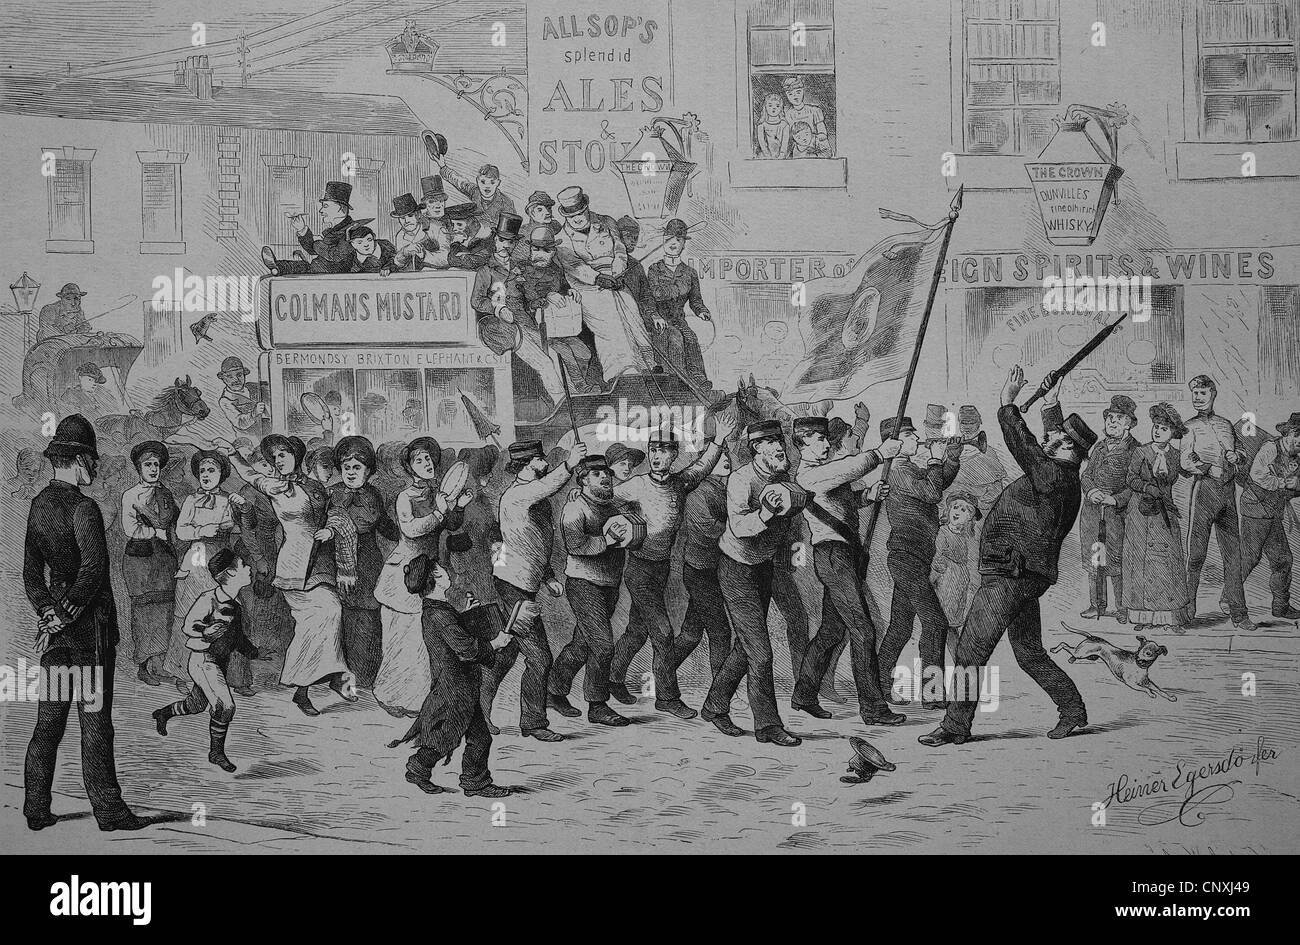 Salvation Army in London, England, historical engraving, 1883 Stock Photo